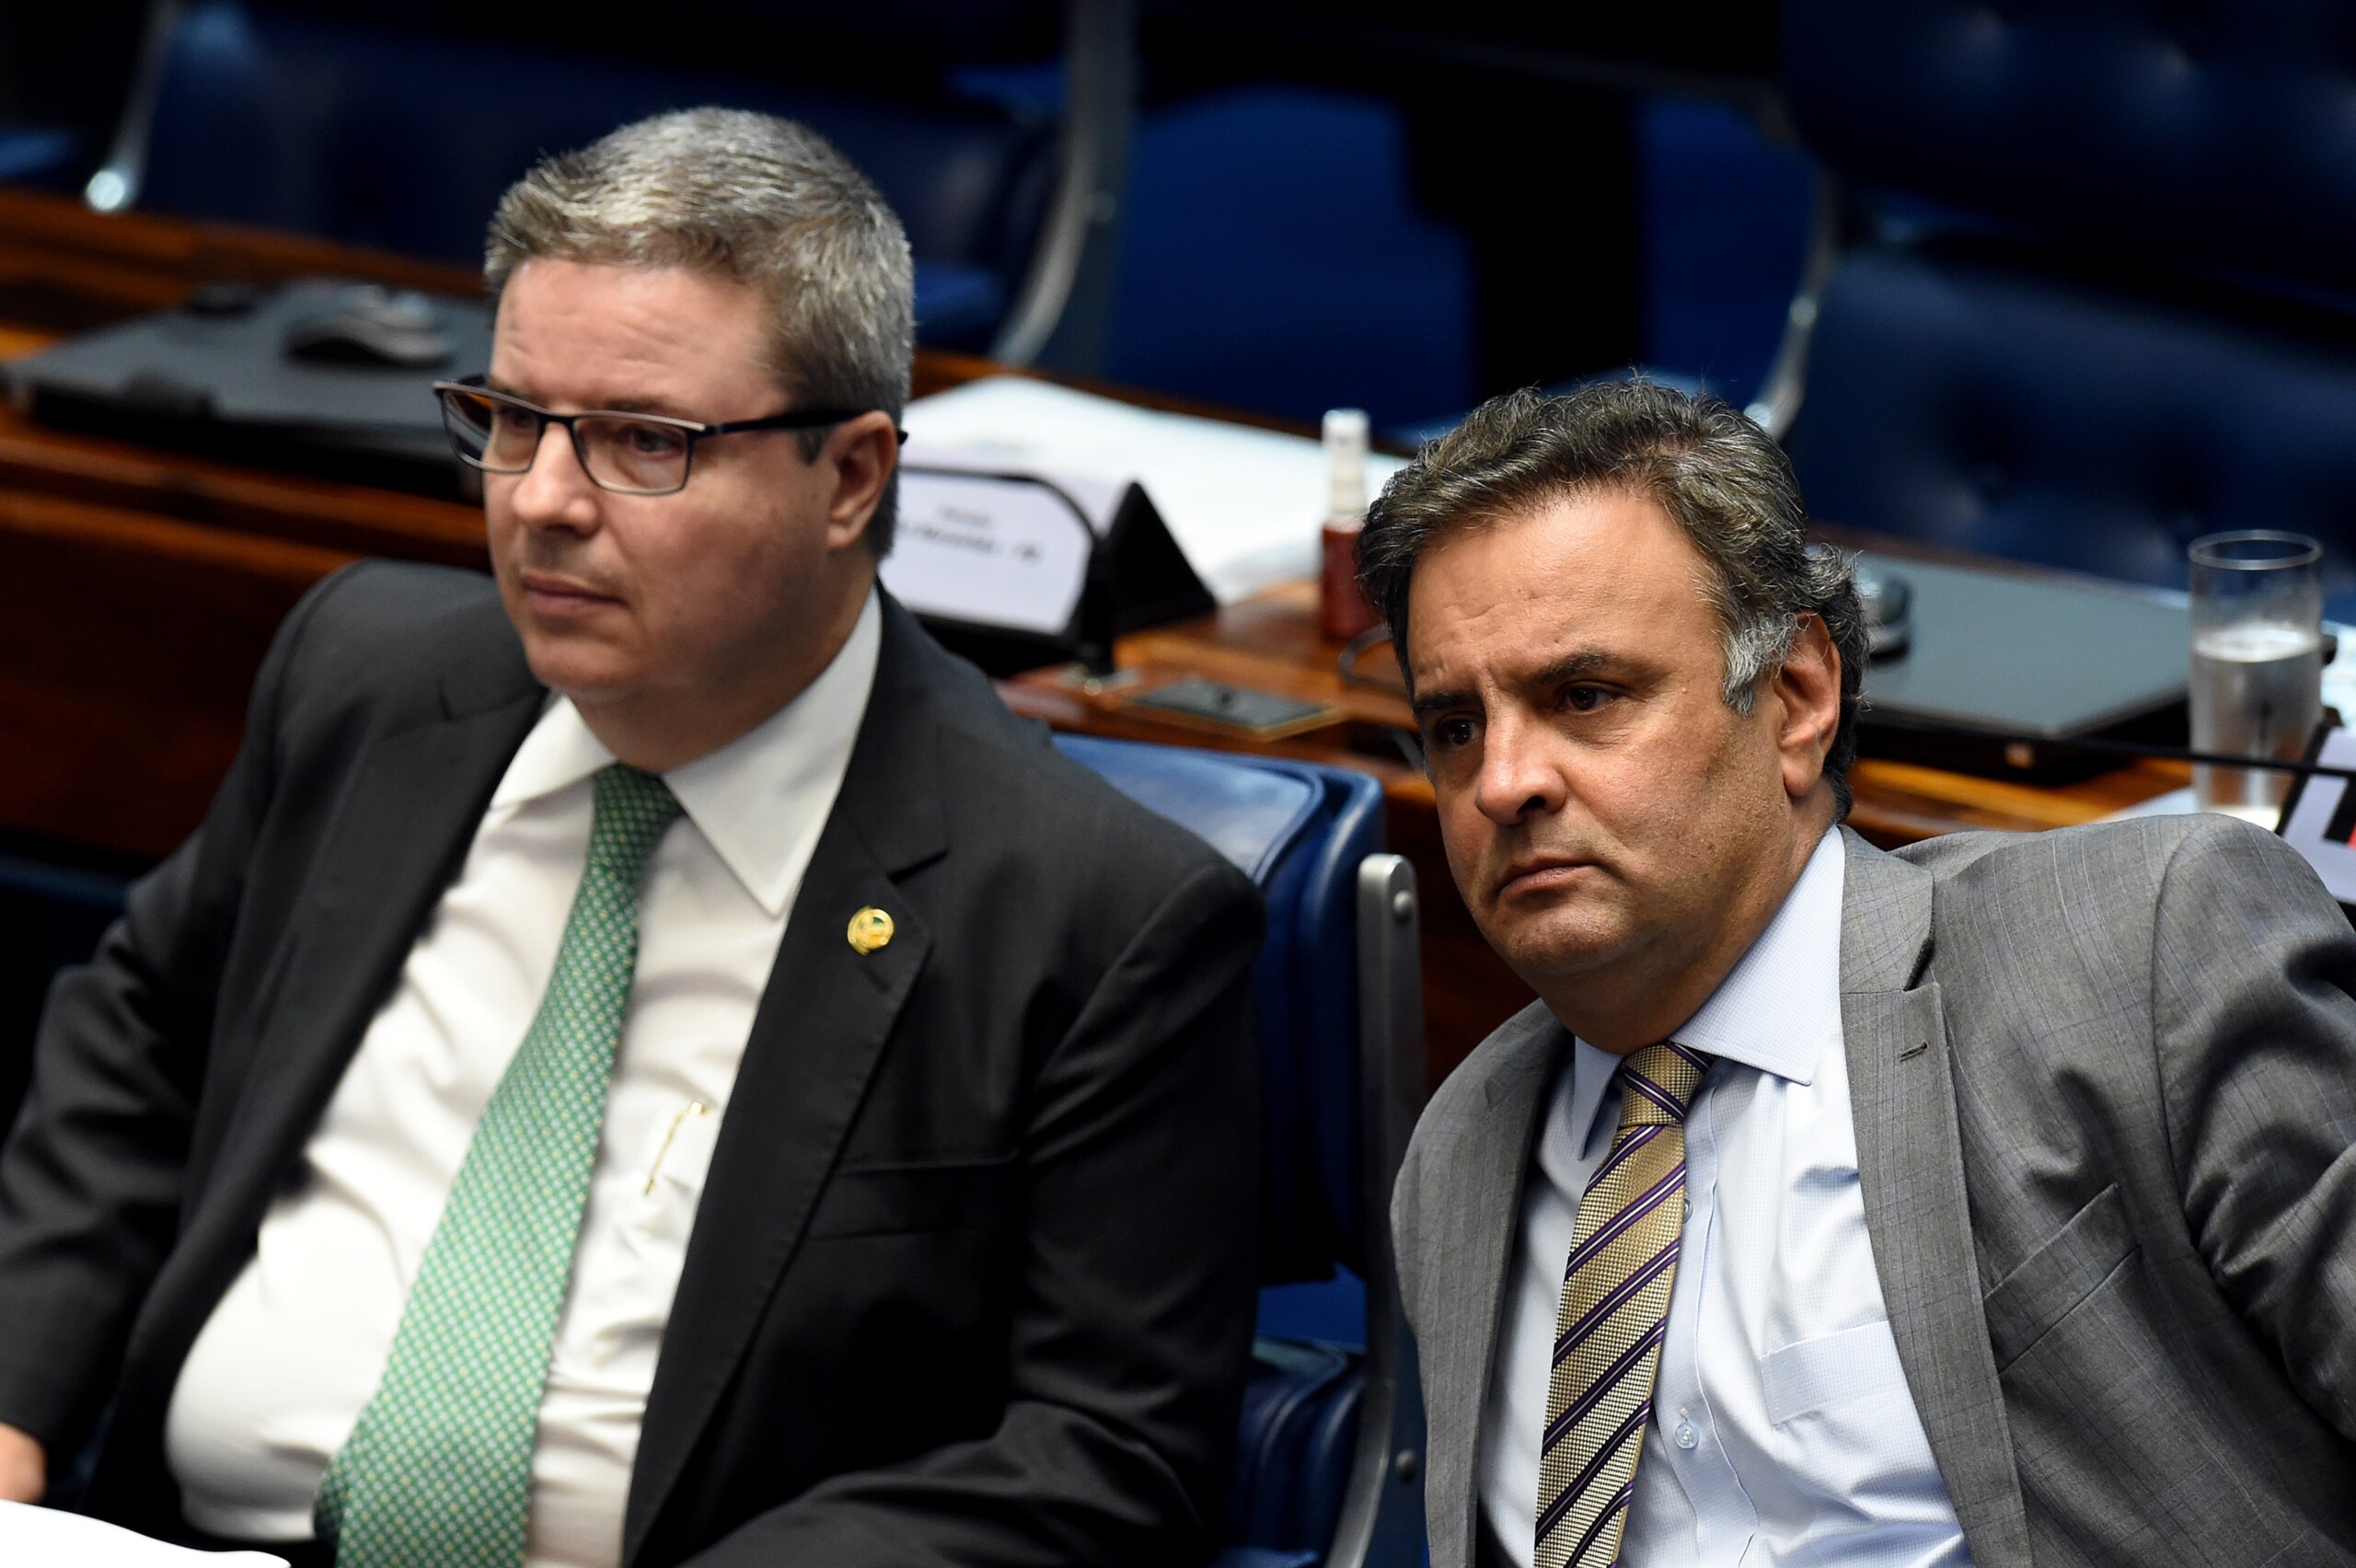 Senator Aecio Neves (R), who heads the PSDB opposition party, sits next to senator Antonio Anastasia, also from the PSDB, during a senate's session to form a committee that will consider whether to impeach President Dilma Rousseff, in Brasilia, on April 25, 2016.<br /><br /><br /><br /><br /><br /><br />
Brazil's Senate met Monday to form a committee that will consider whether to impeach Rousseff, who has accused her opponents of mounting a constitutional coup. She is accused of illegal government accounting maneuvers, but says she has not committed an impeachment-worthy crime. The Senate committee -- comprising 21 of the 81 senators -- was to debate Rousseff's fate for up to 10 working days before making a recommendation to the full upper house.<br /><br /><br /><br /><br /><br /><br />
 / AFP / EVARISTO SA        (Photo credit should read EVARISTO SA/AFP/Getty Images)